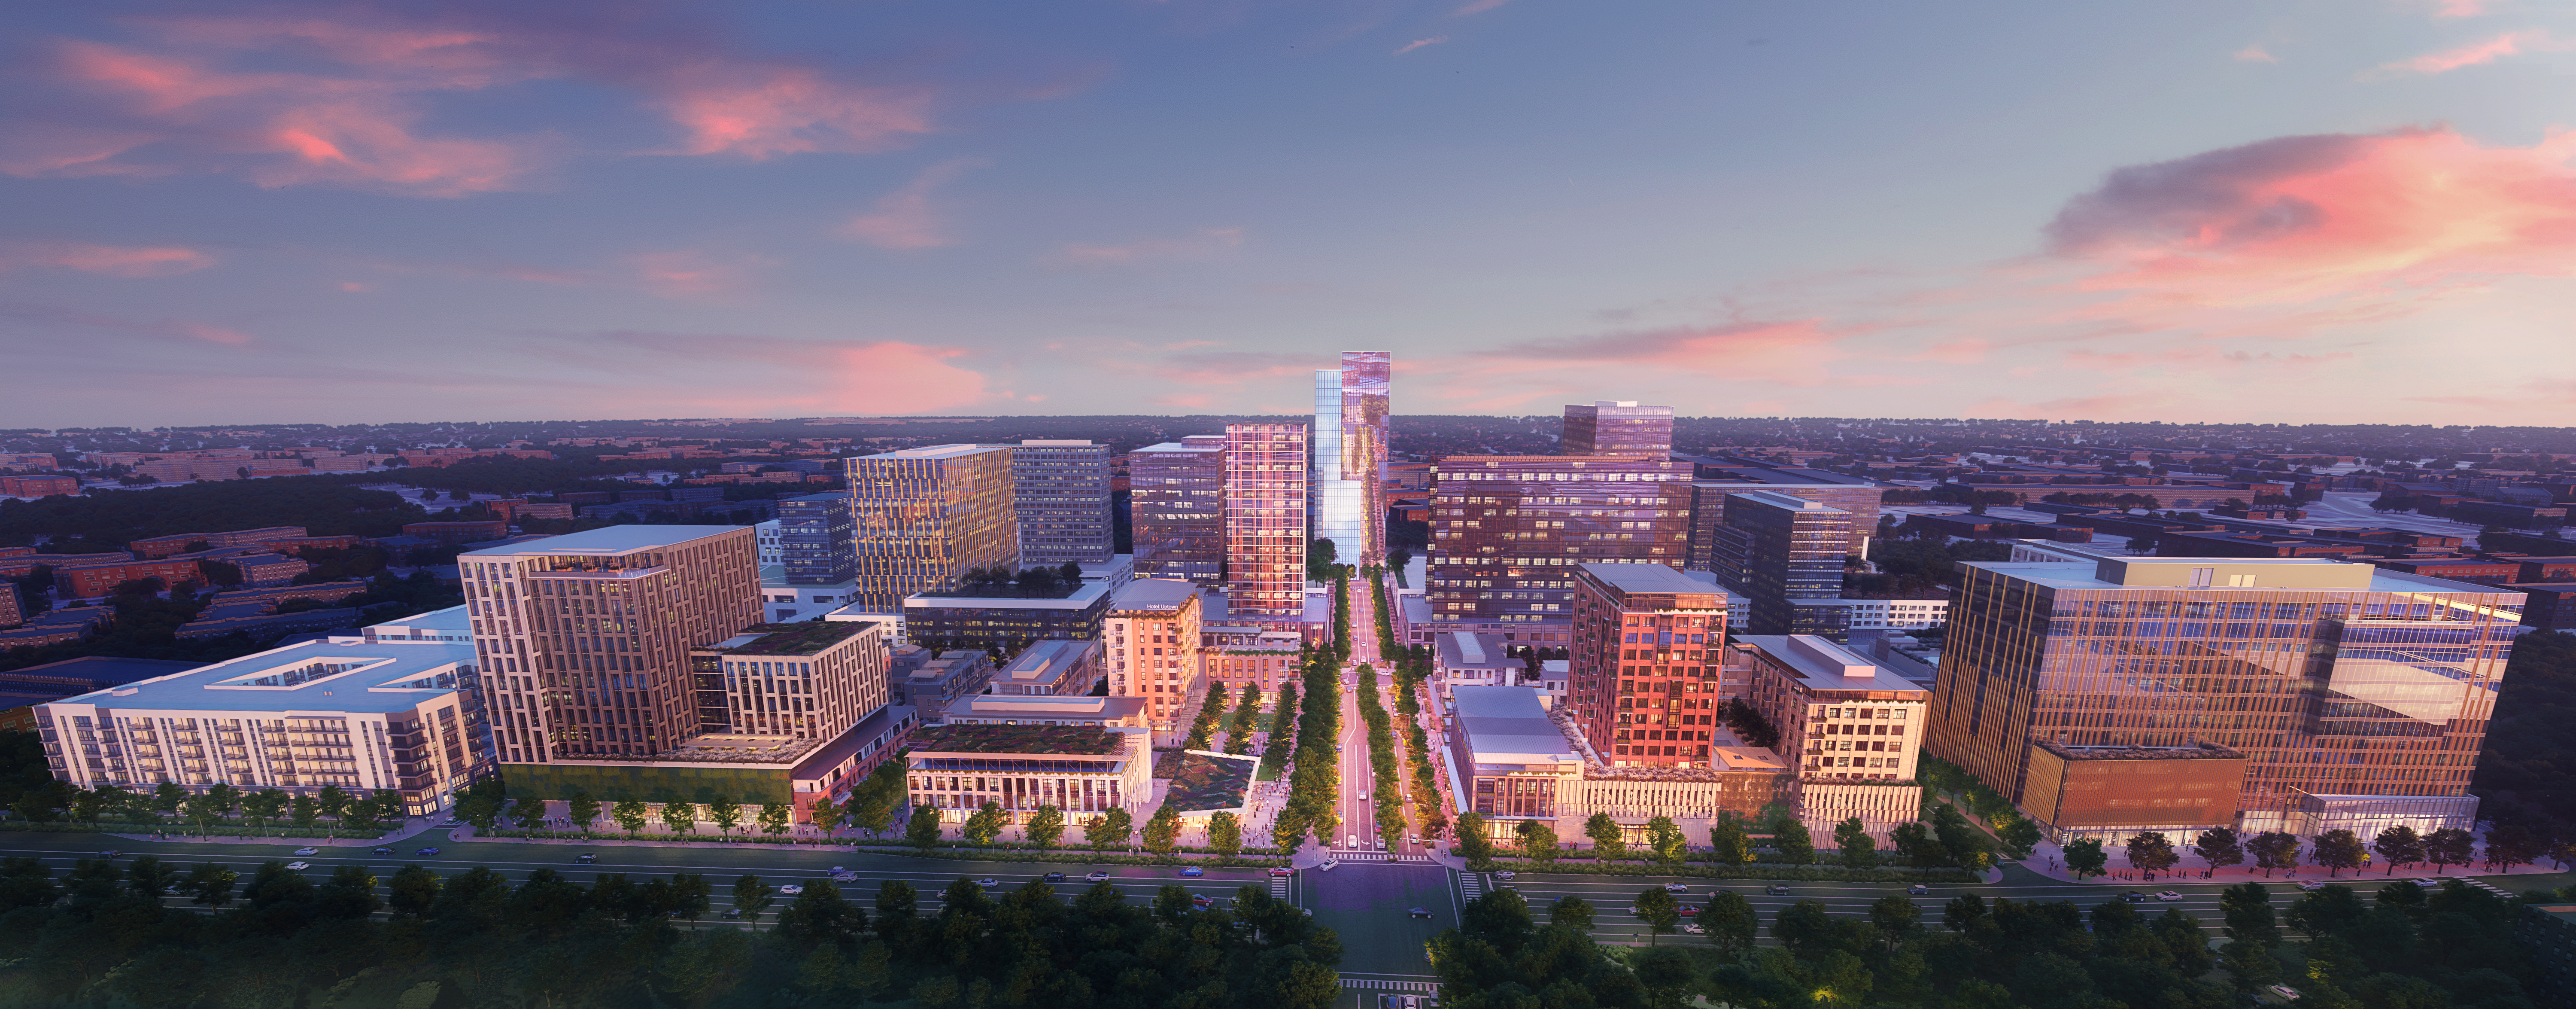 Construction Commences on $3 Billion, 66-Acre, Master-Planned, Mixed-Use Community in the Heart of Austin's Second Downtown